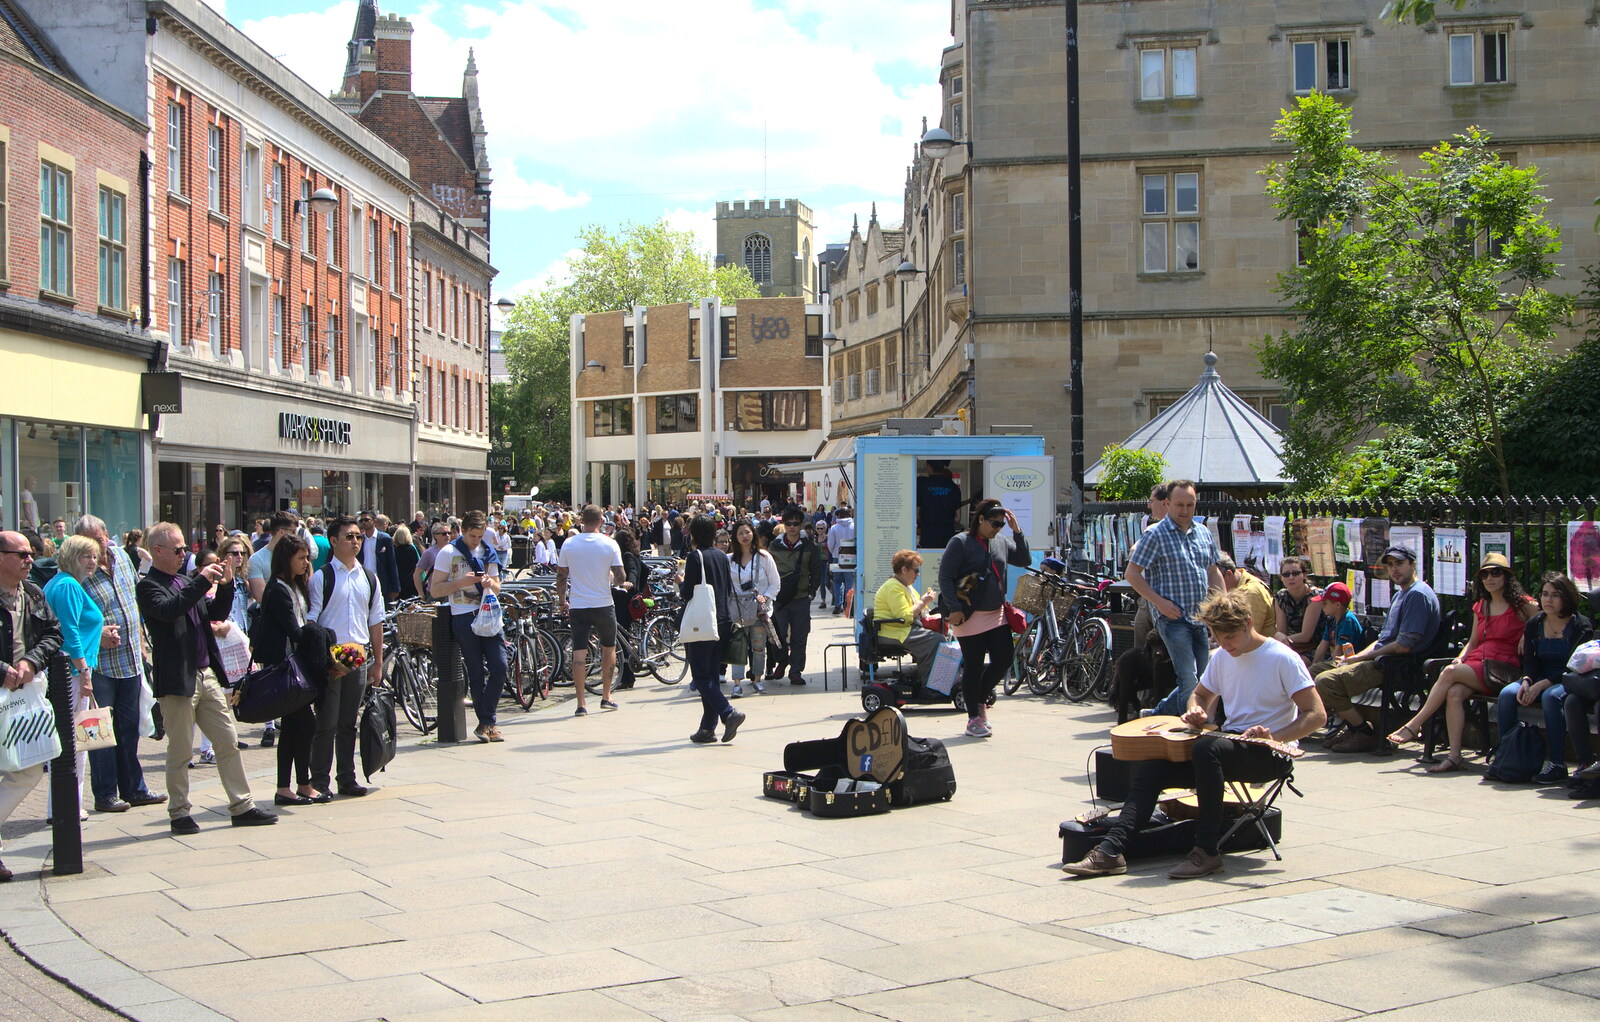 The buskers on Sydney Street have changed over from Punting With Grandad, Cambridge, Cambridgeshire - 6th June 2015